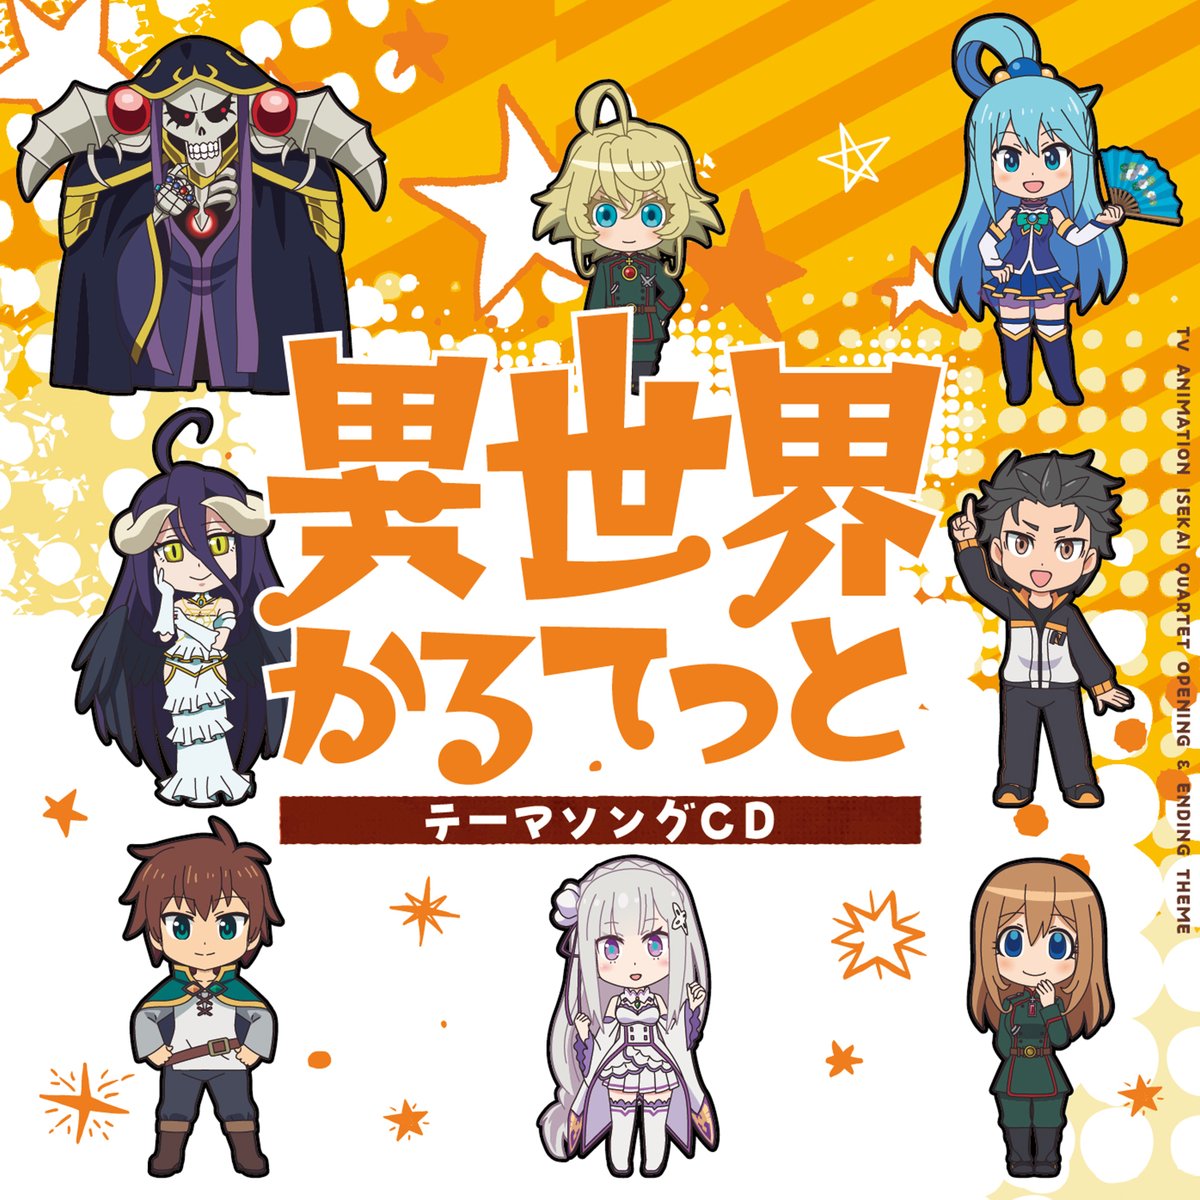 Ao Oni Online x Isekai Quartet Collab Starts from August 8